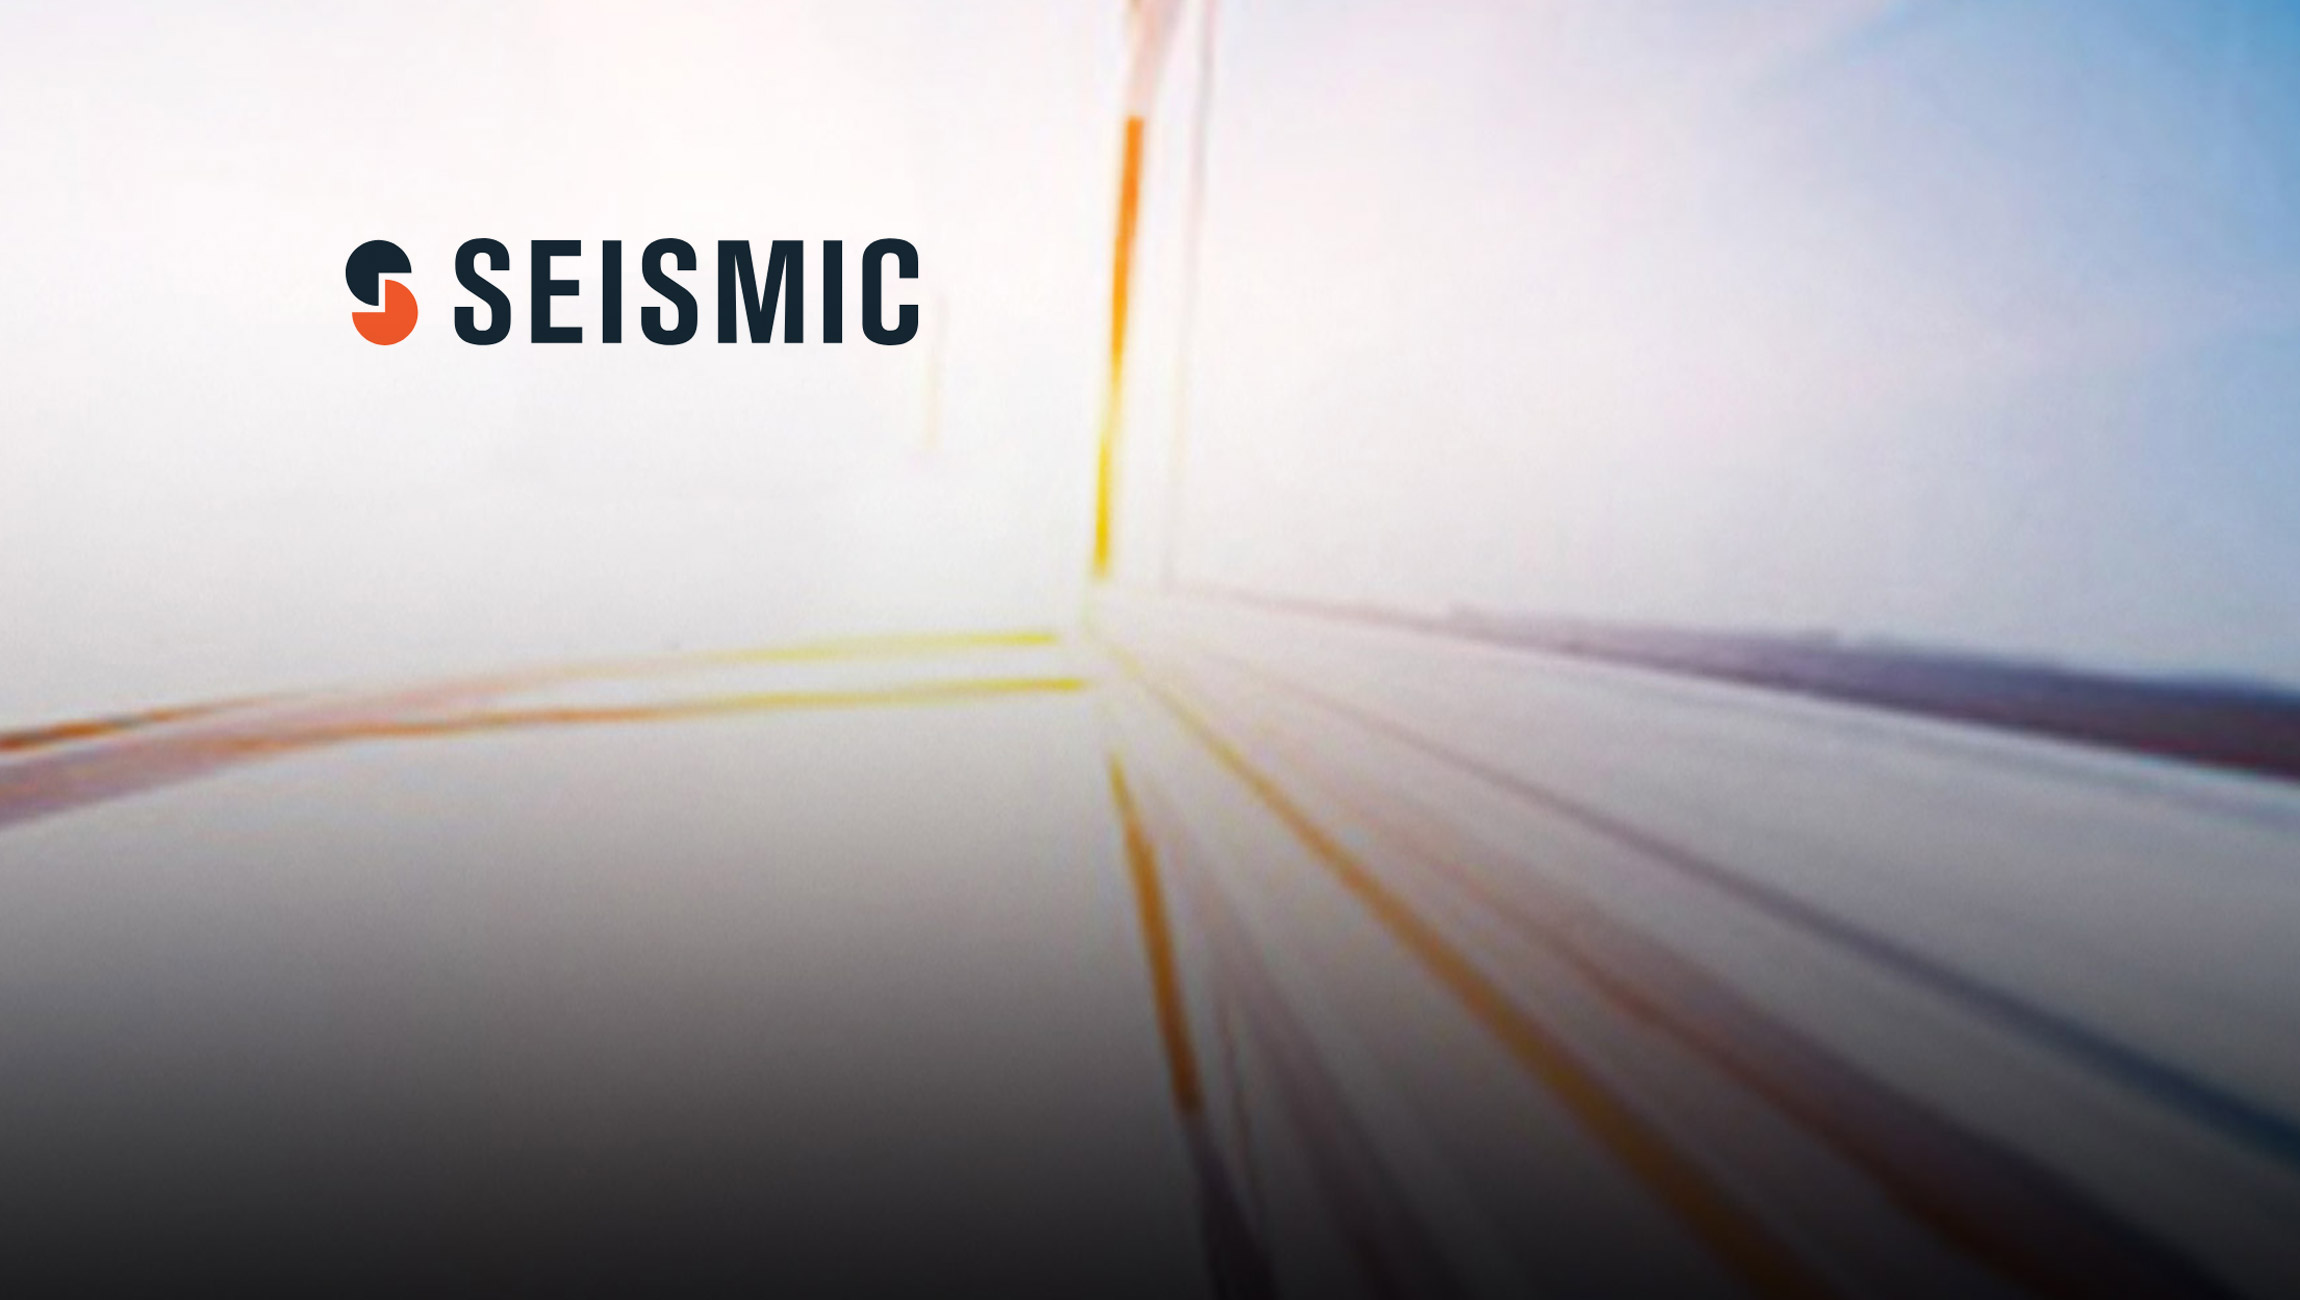 Seismic Spring 2021 Release Delivers Capabilities to Optimise AI-Guided Selling Experience for Next Era of Digital Buyer Engagement